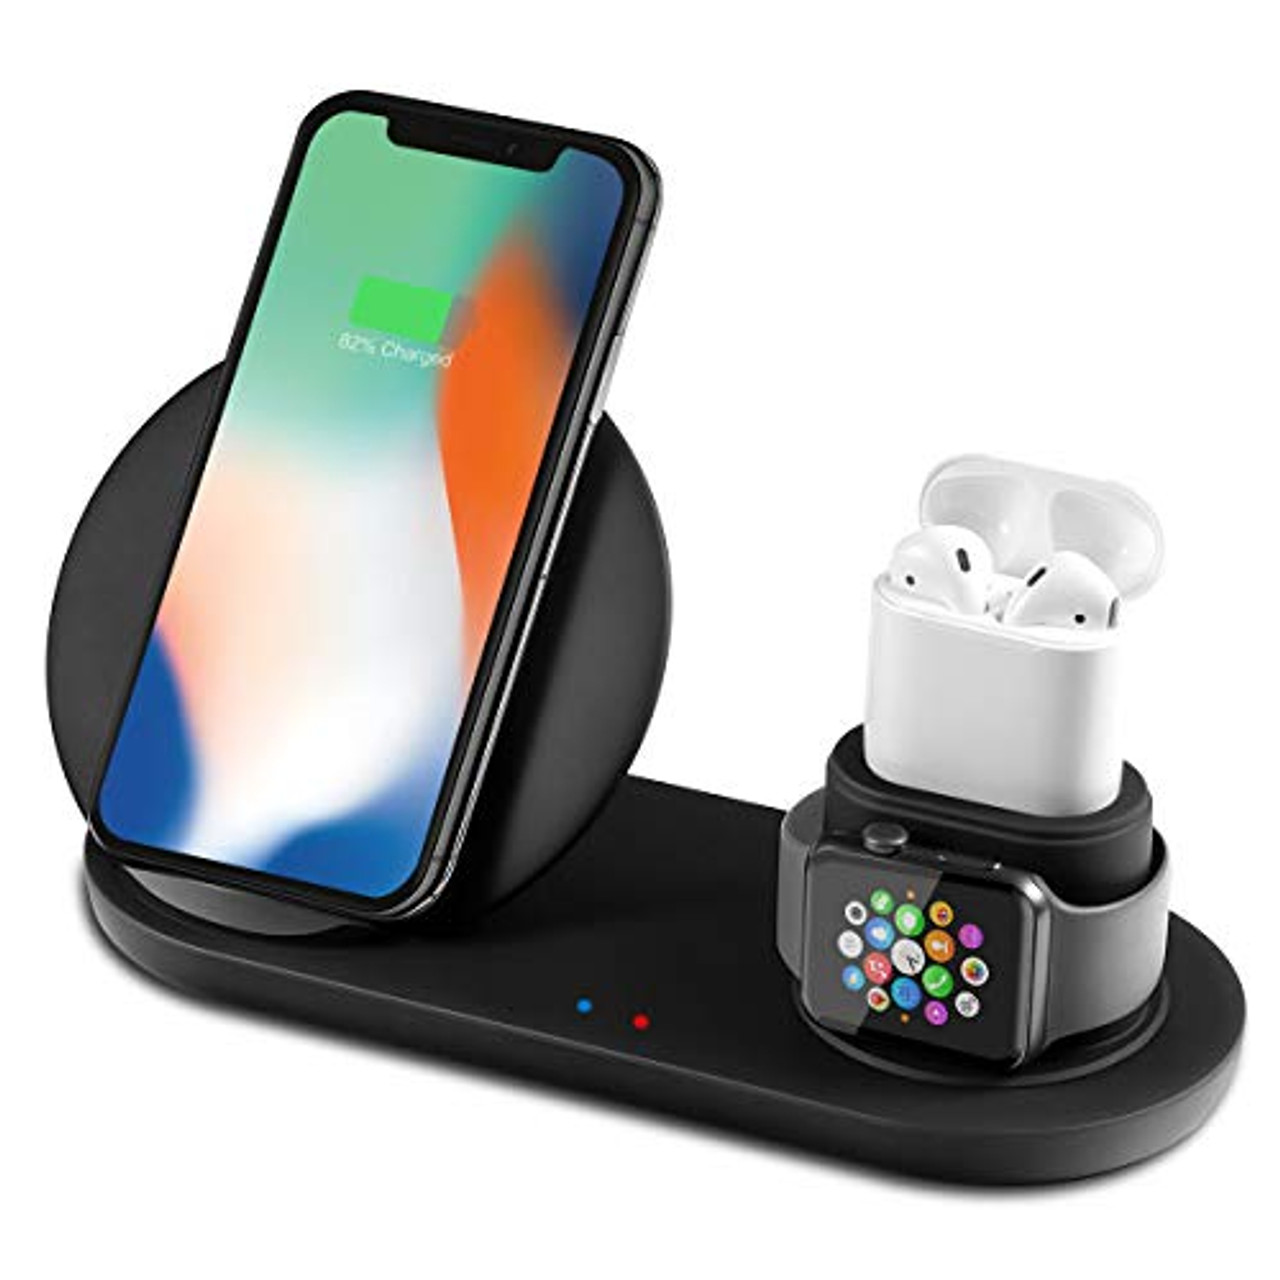 Airpods 2 Samsung S8 on Sale, UP TO 65% OFF | agrichembio.com